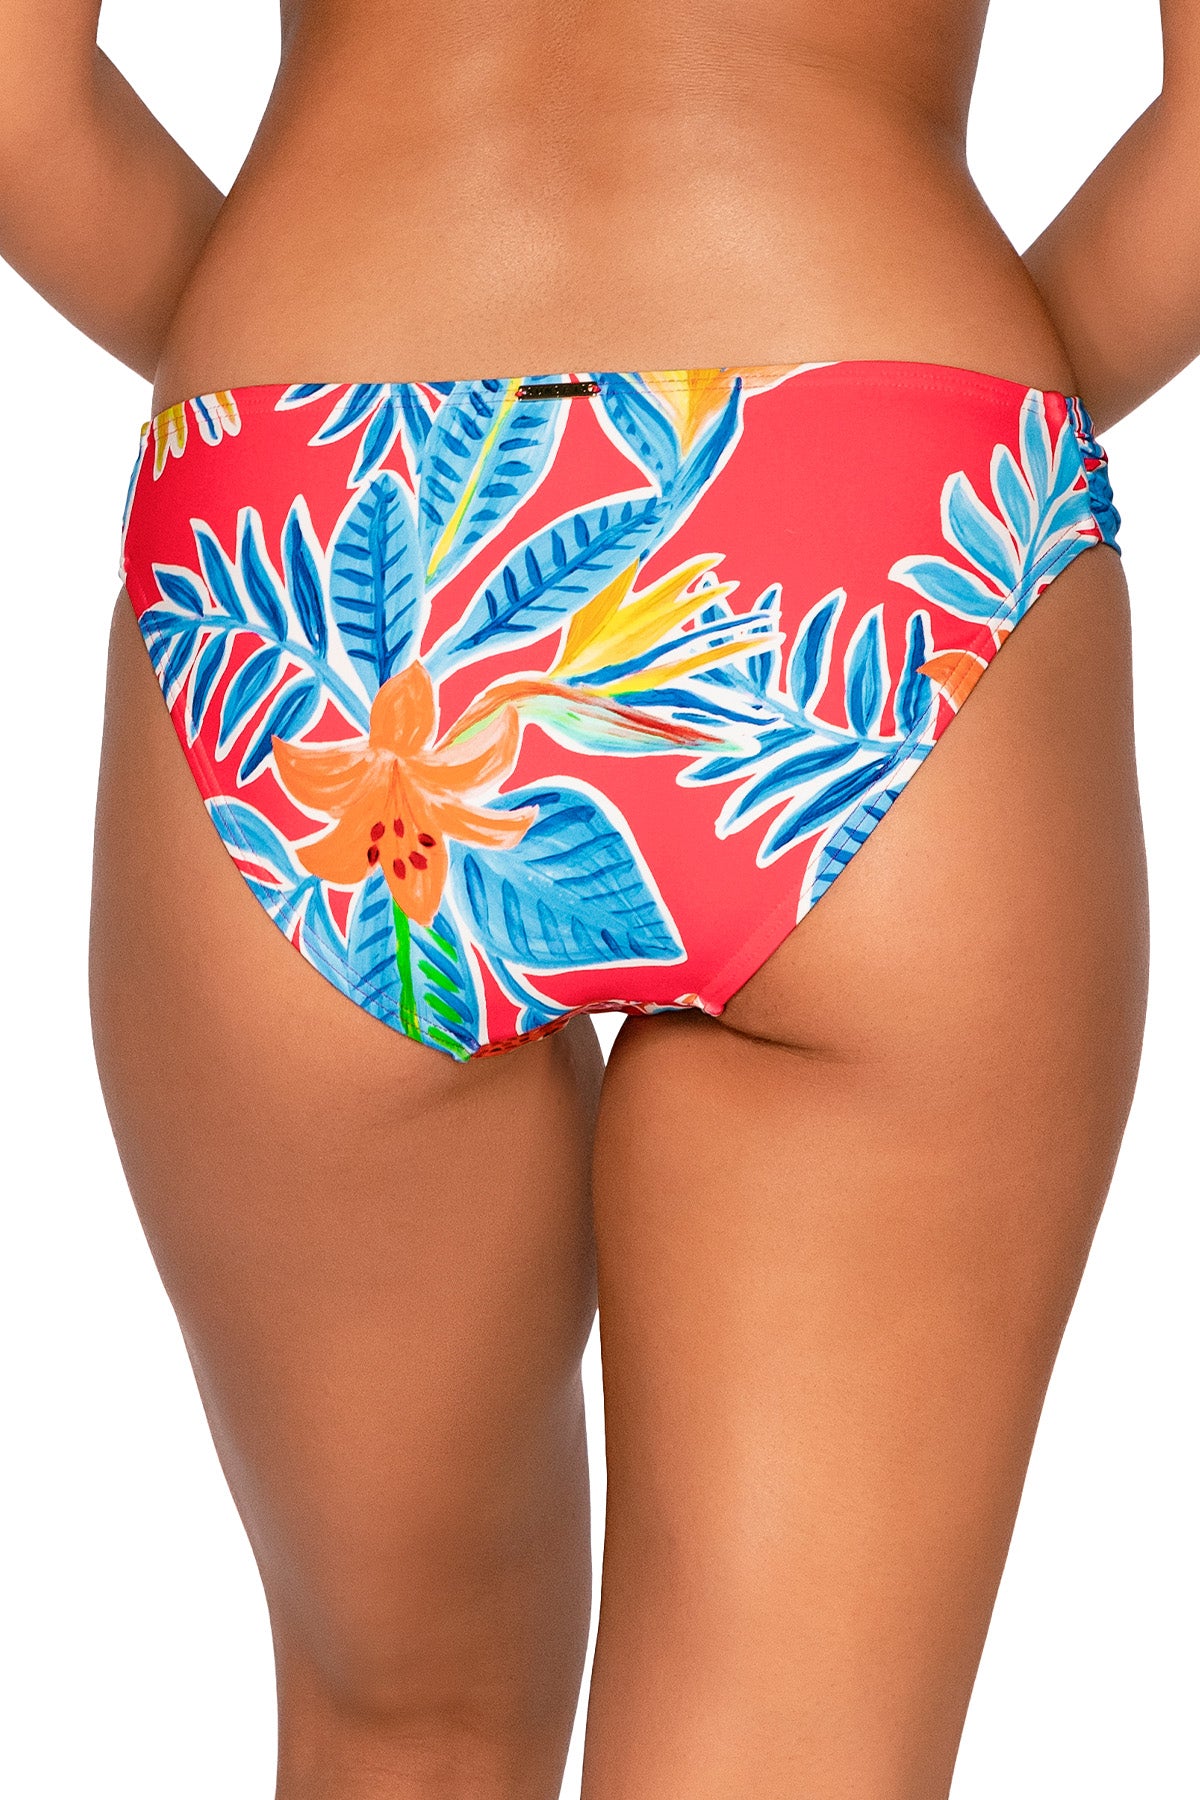 Back view of Sunsets Tiger Lily Femme Fatale Hipster Bottom